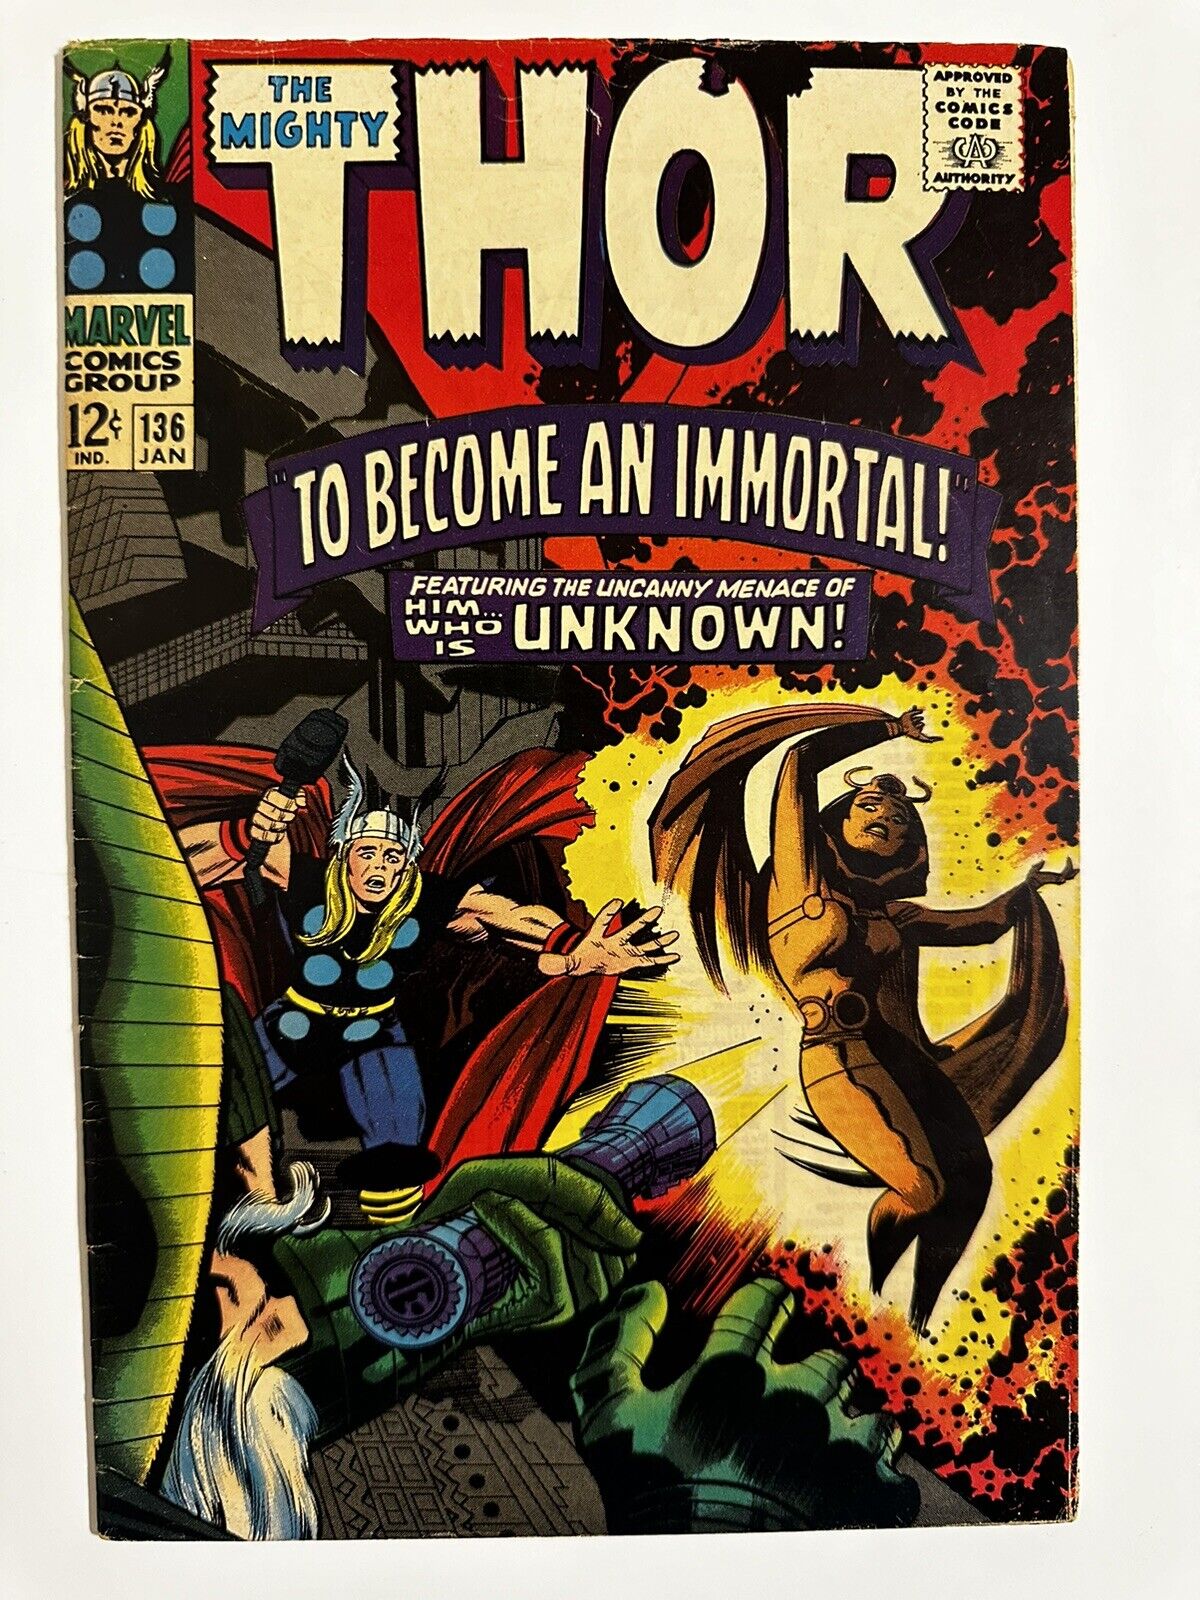 The Mighty Thor #136 (1st app of Sif in ongoing form)